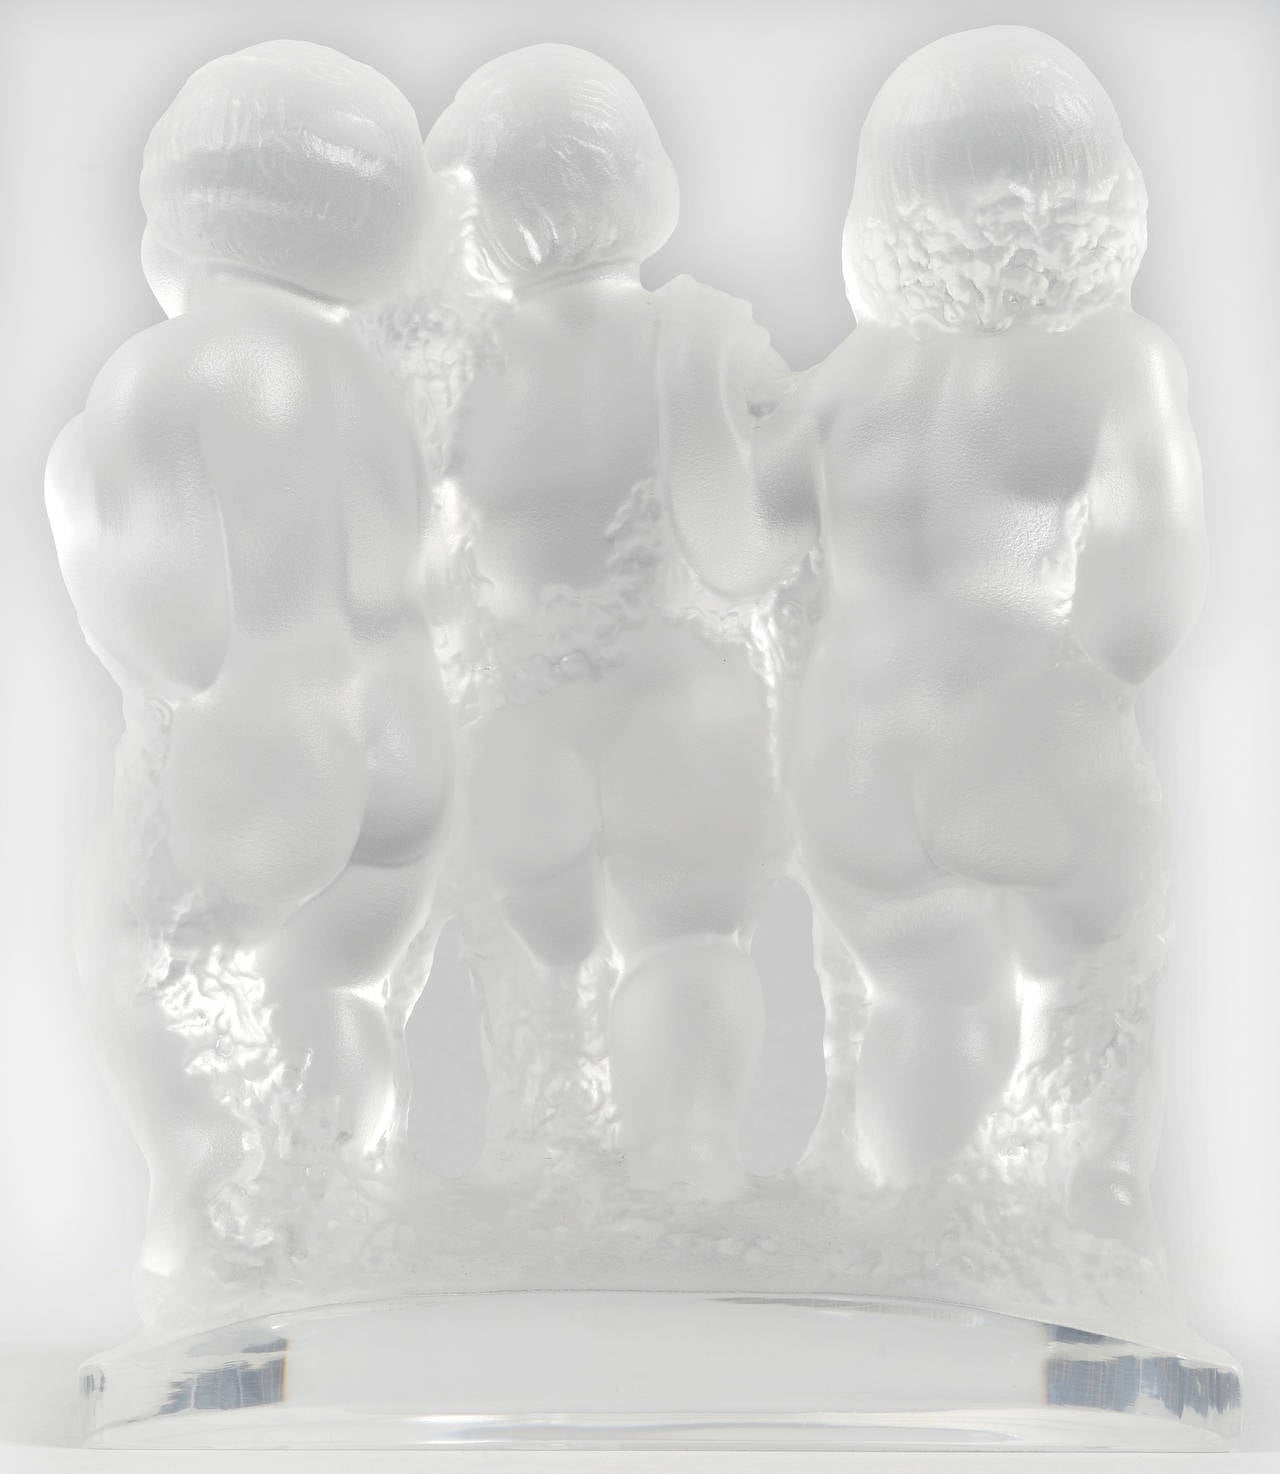 Lalique.
Frosted crystal figural group depicting three graces cherubs with garlands.
Standing on a half moon base.
Engraved signature Lalique ® France.
Measures: Height 19.5 cm (7